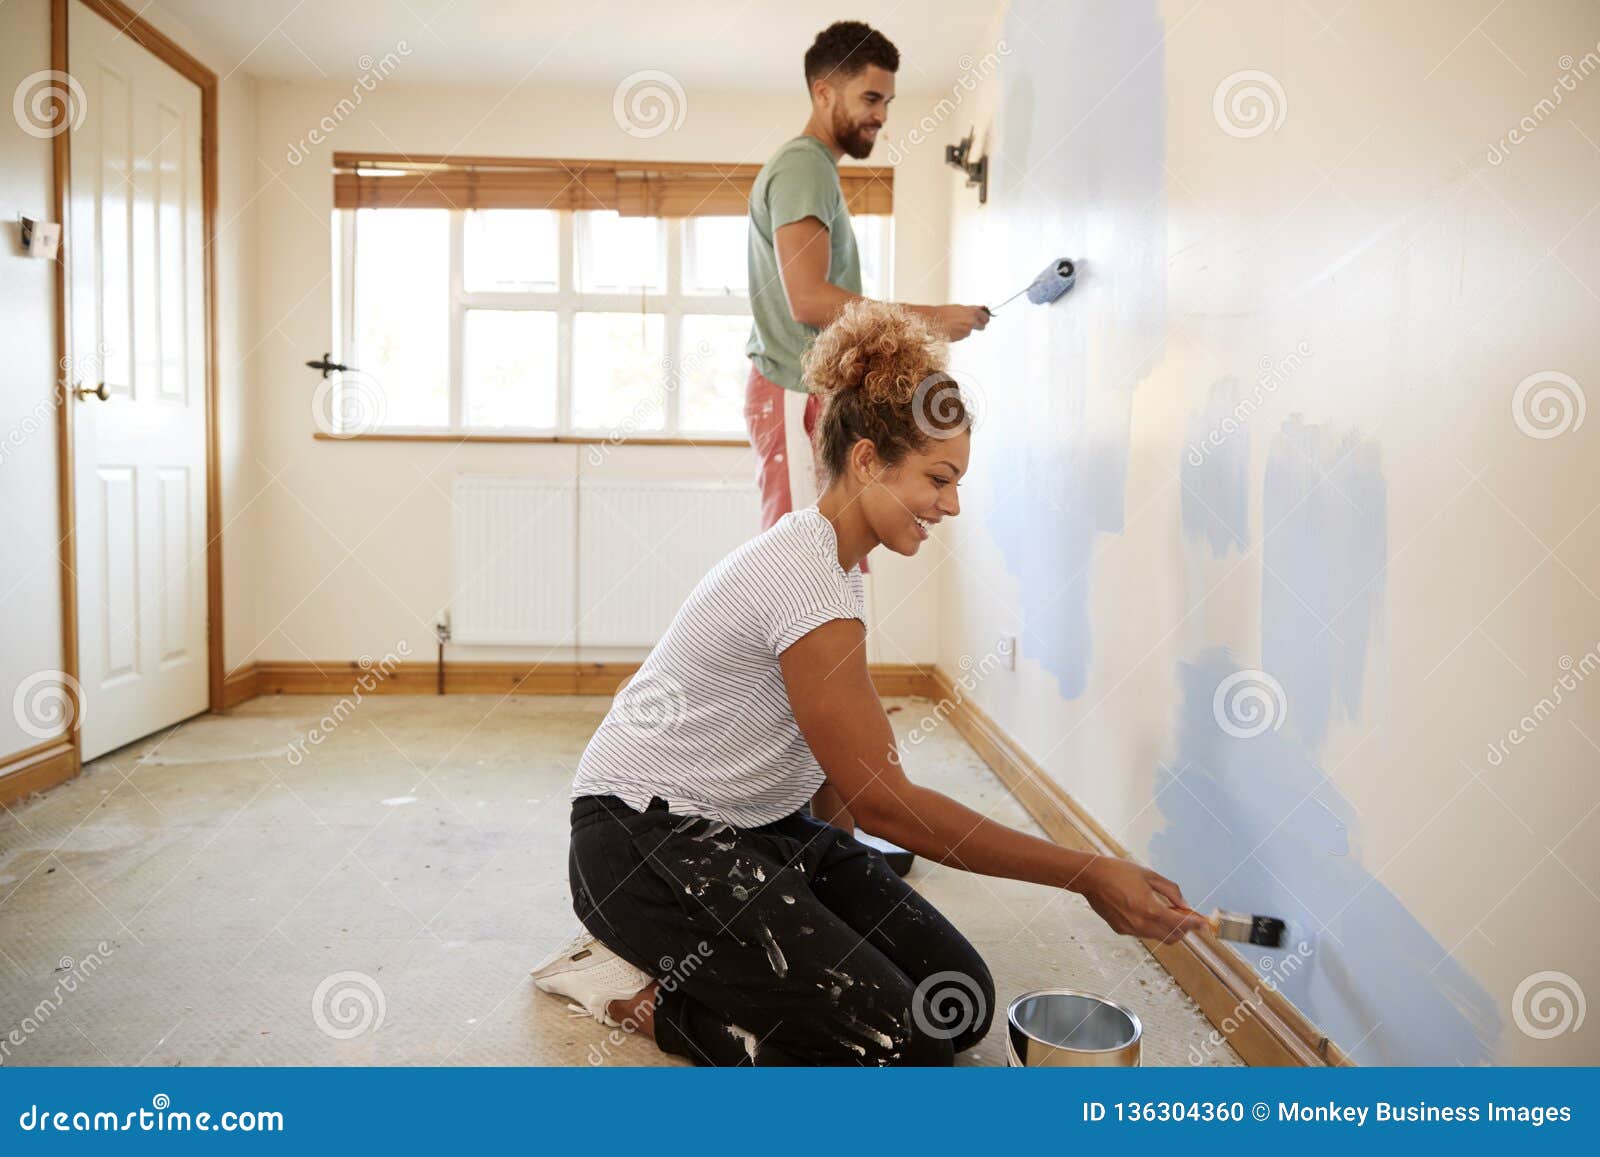 Couple Decorating Room in New Home Painting Wall Together Stock ...